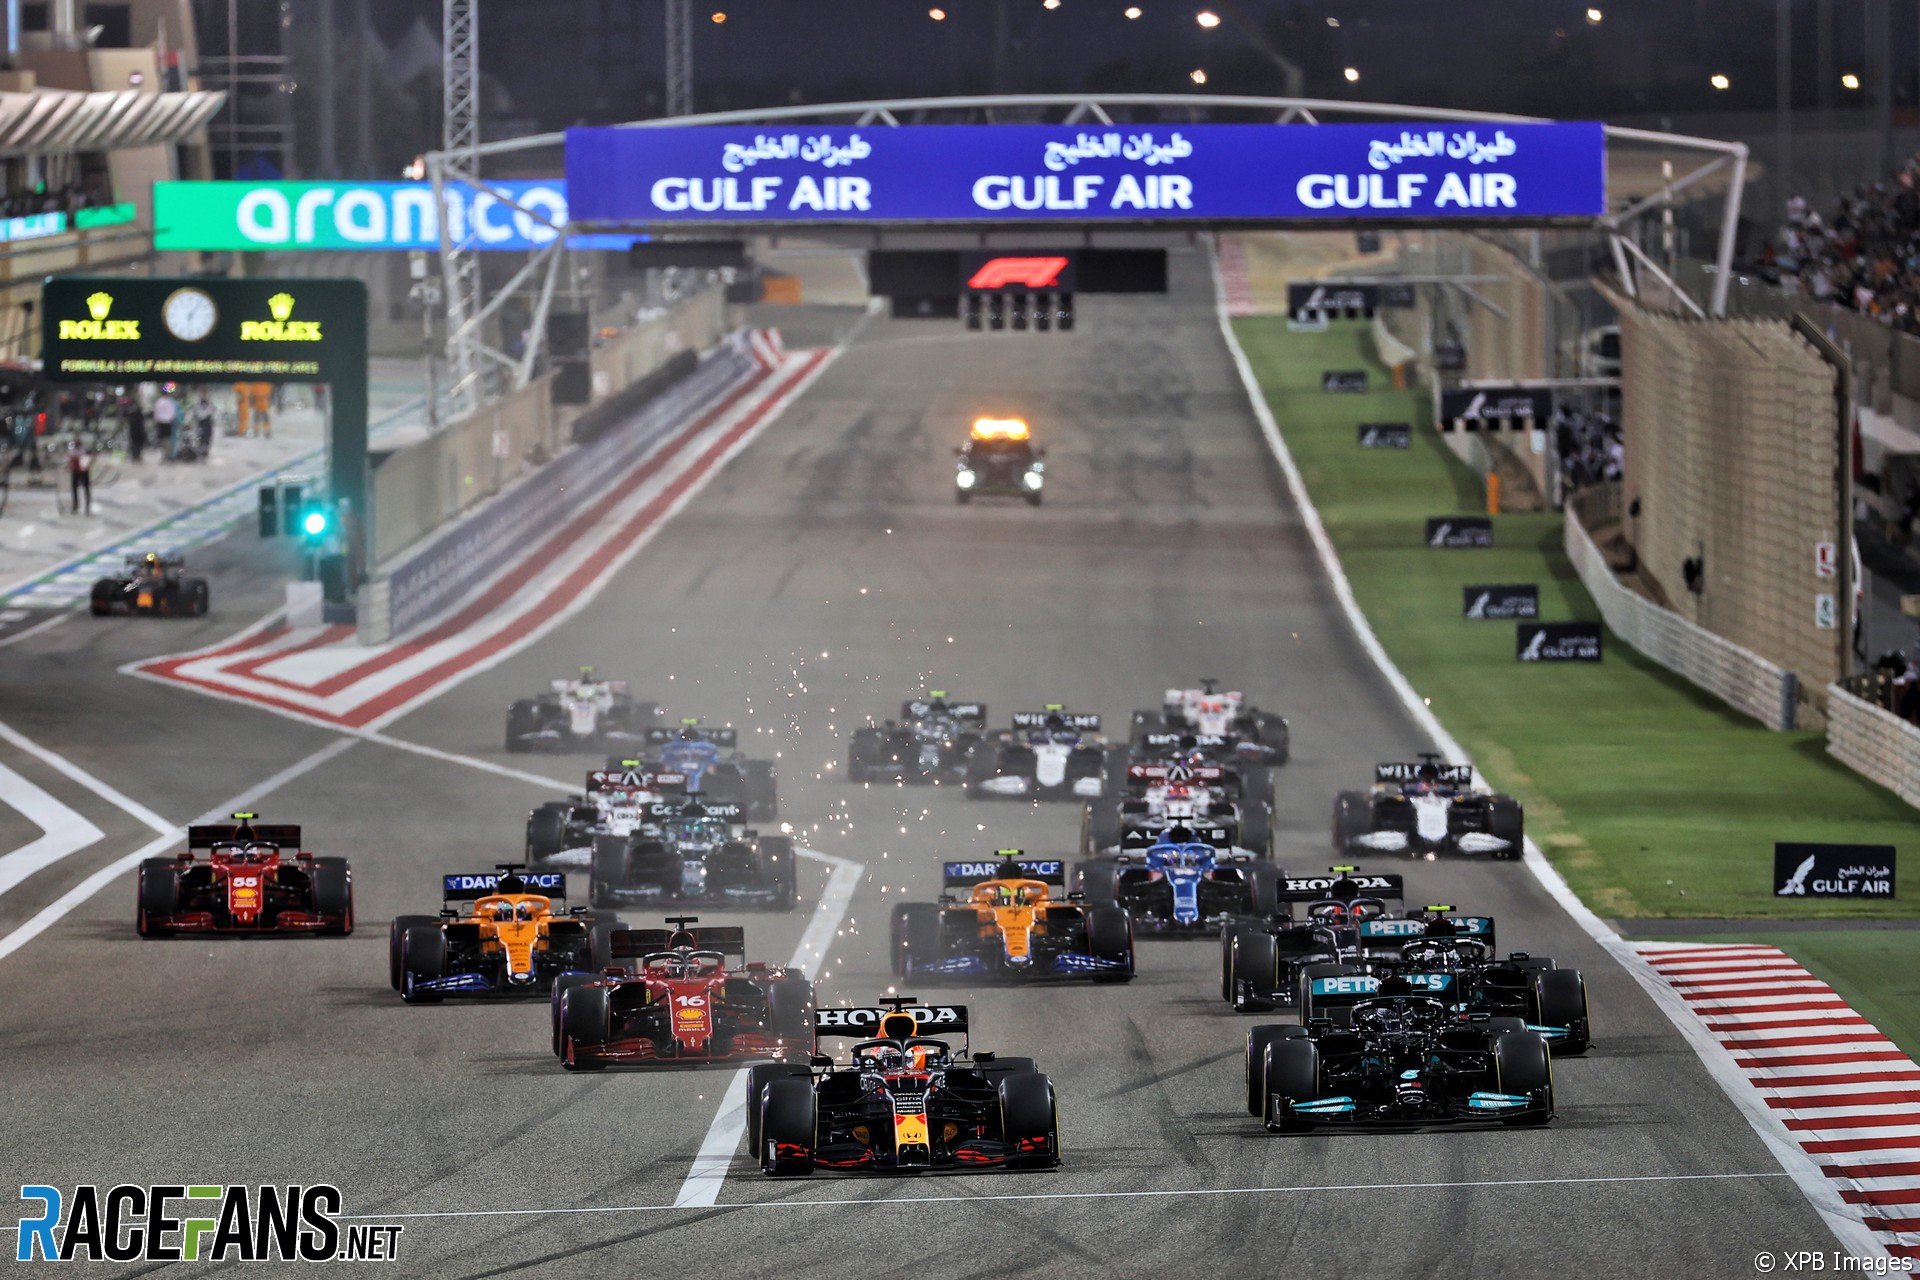 F1 Qualifying Today / Formula 1 Qualifying Results Starting Grid For